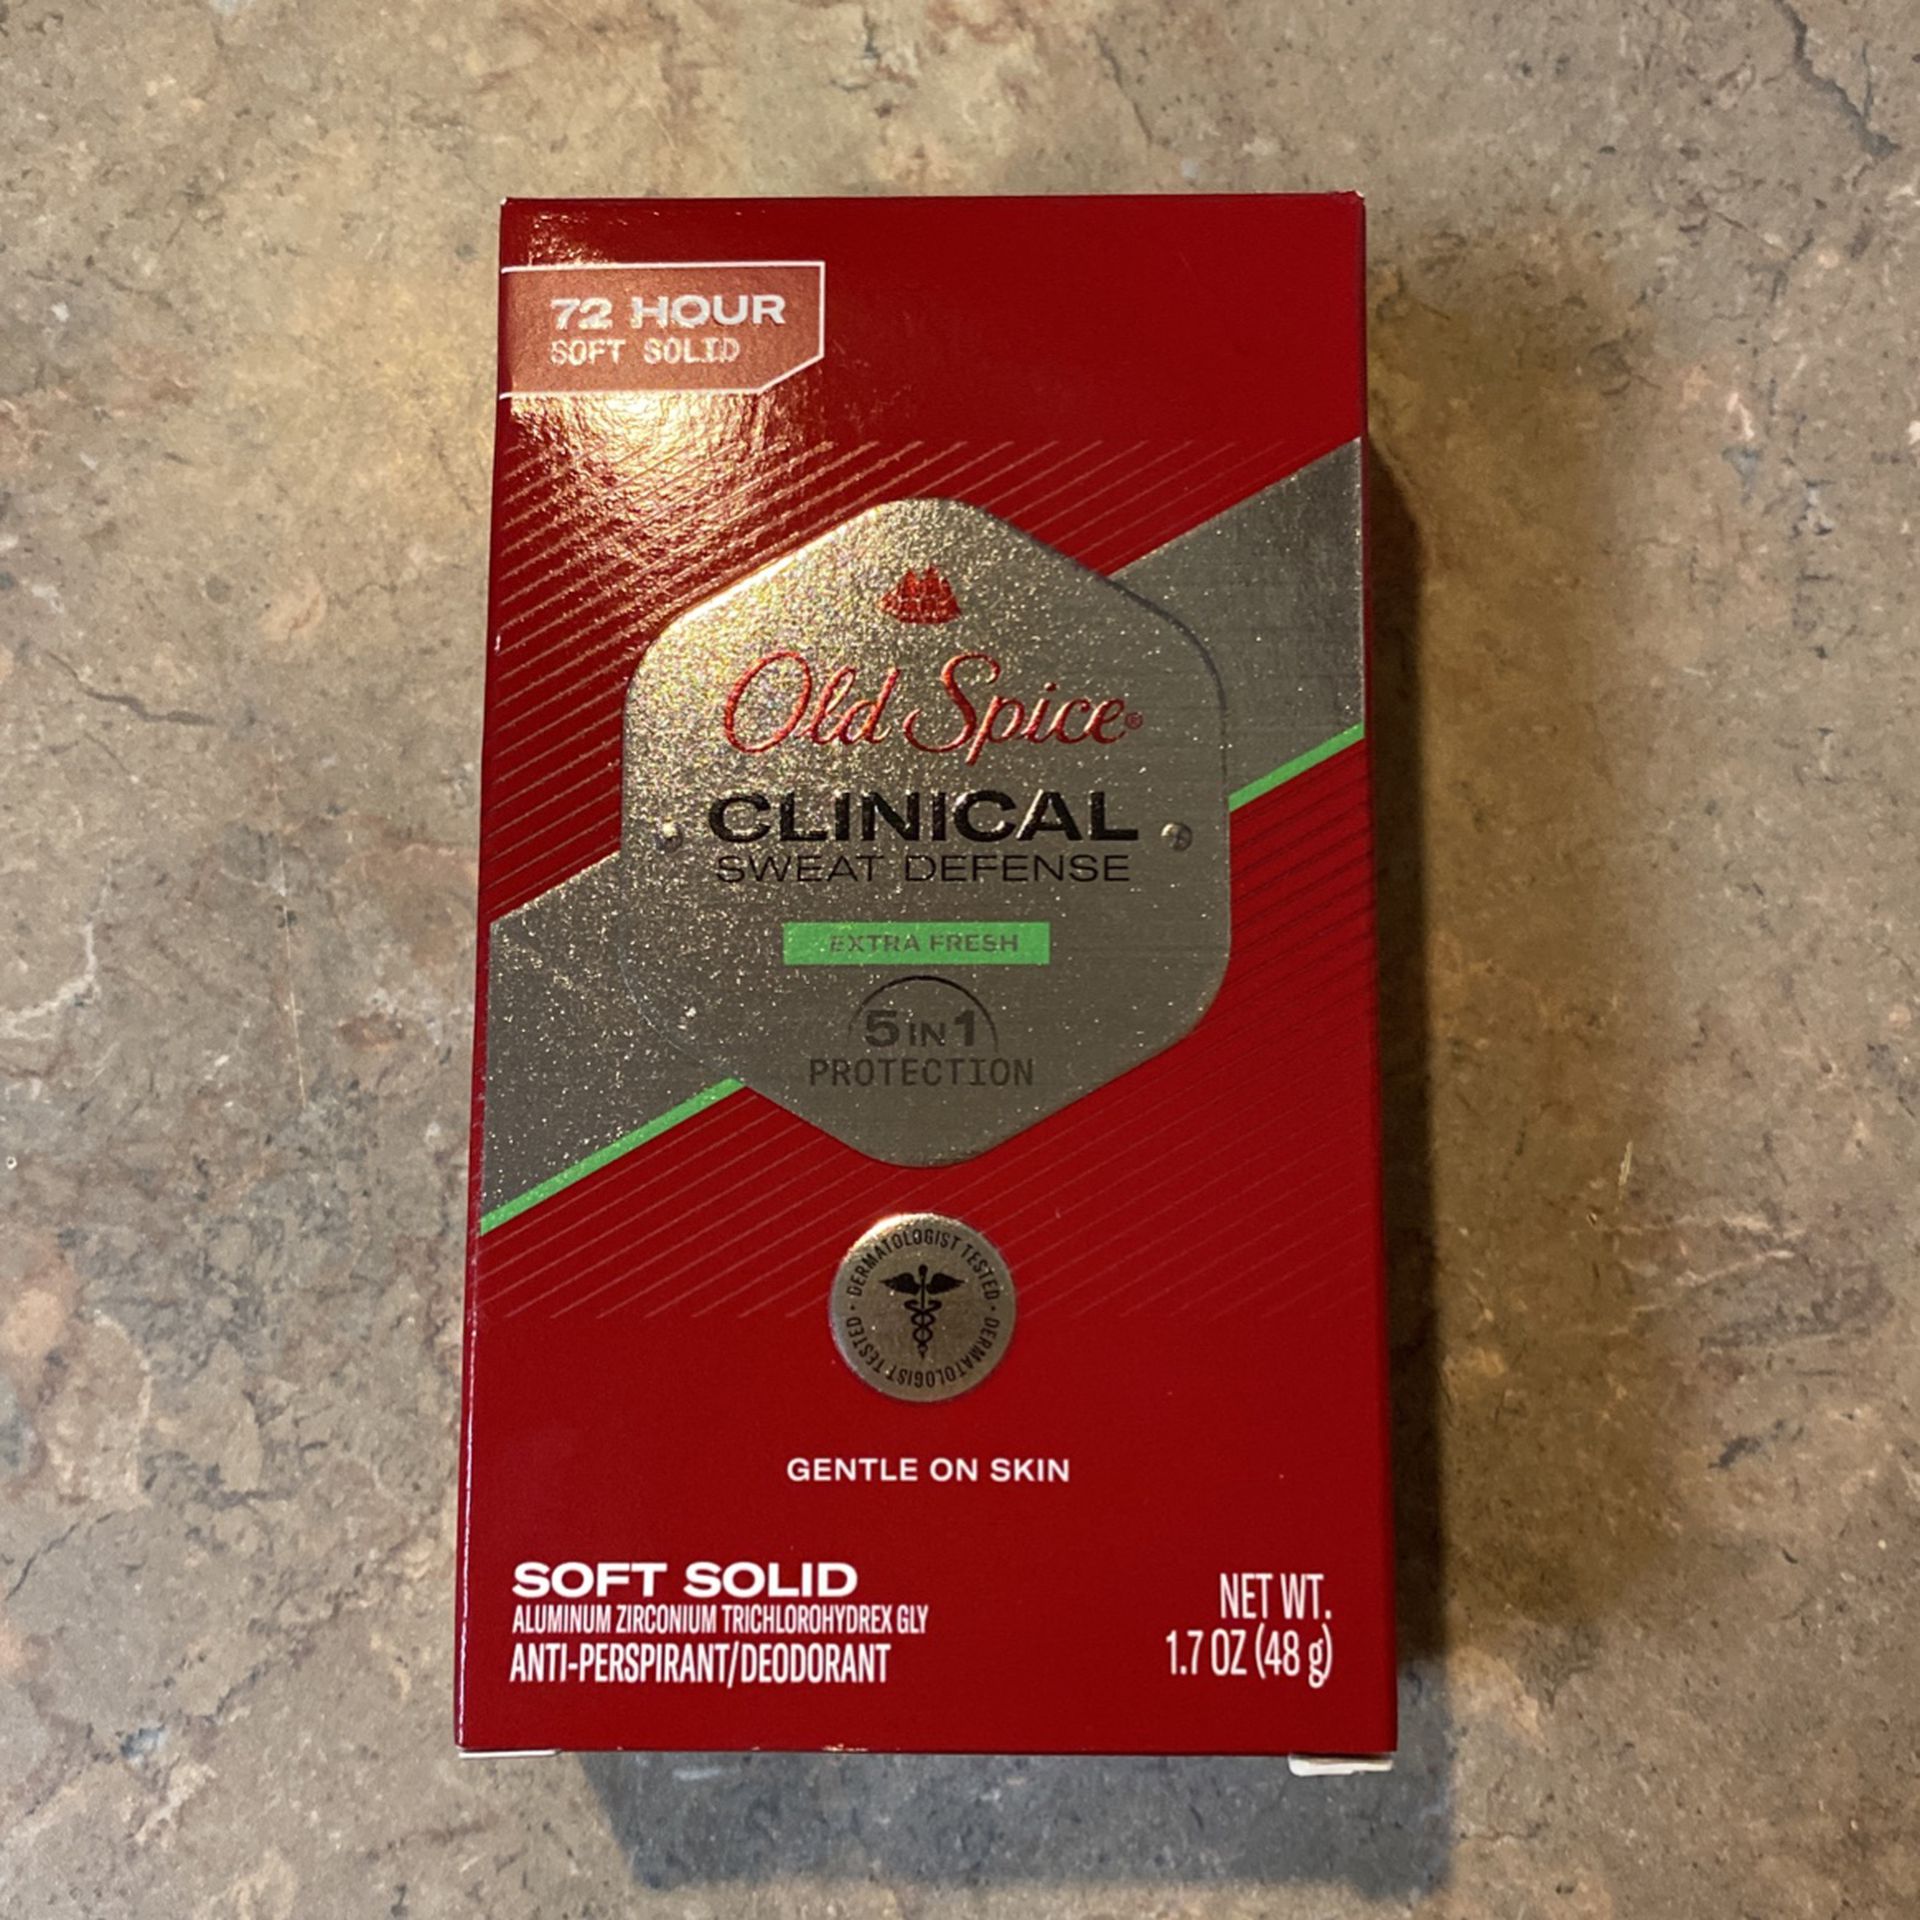 Old Spice $5!